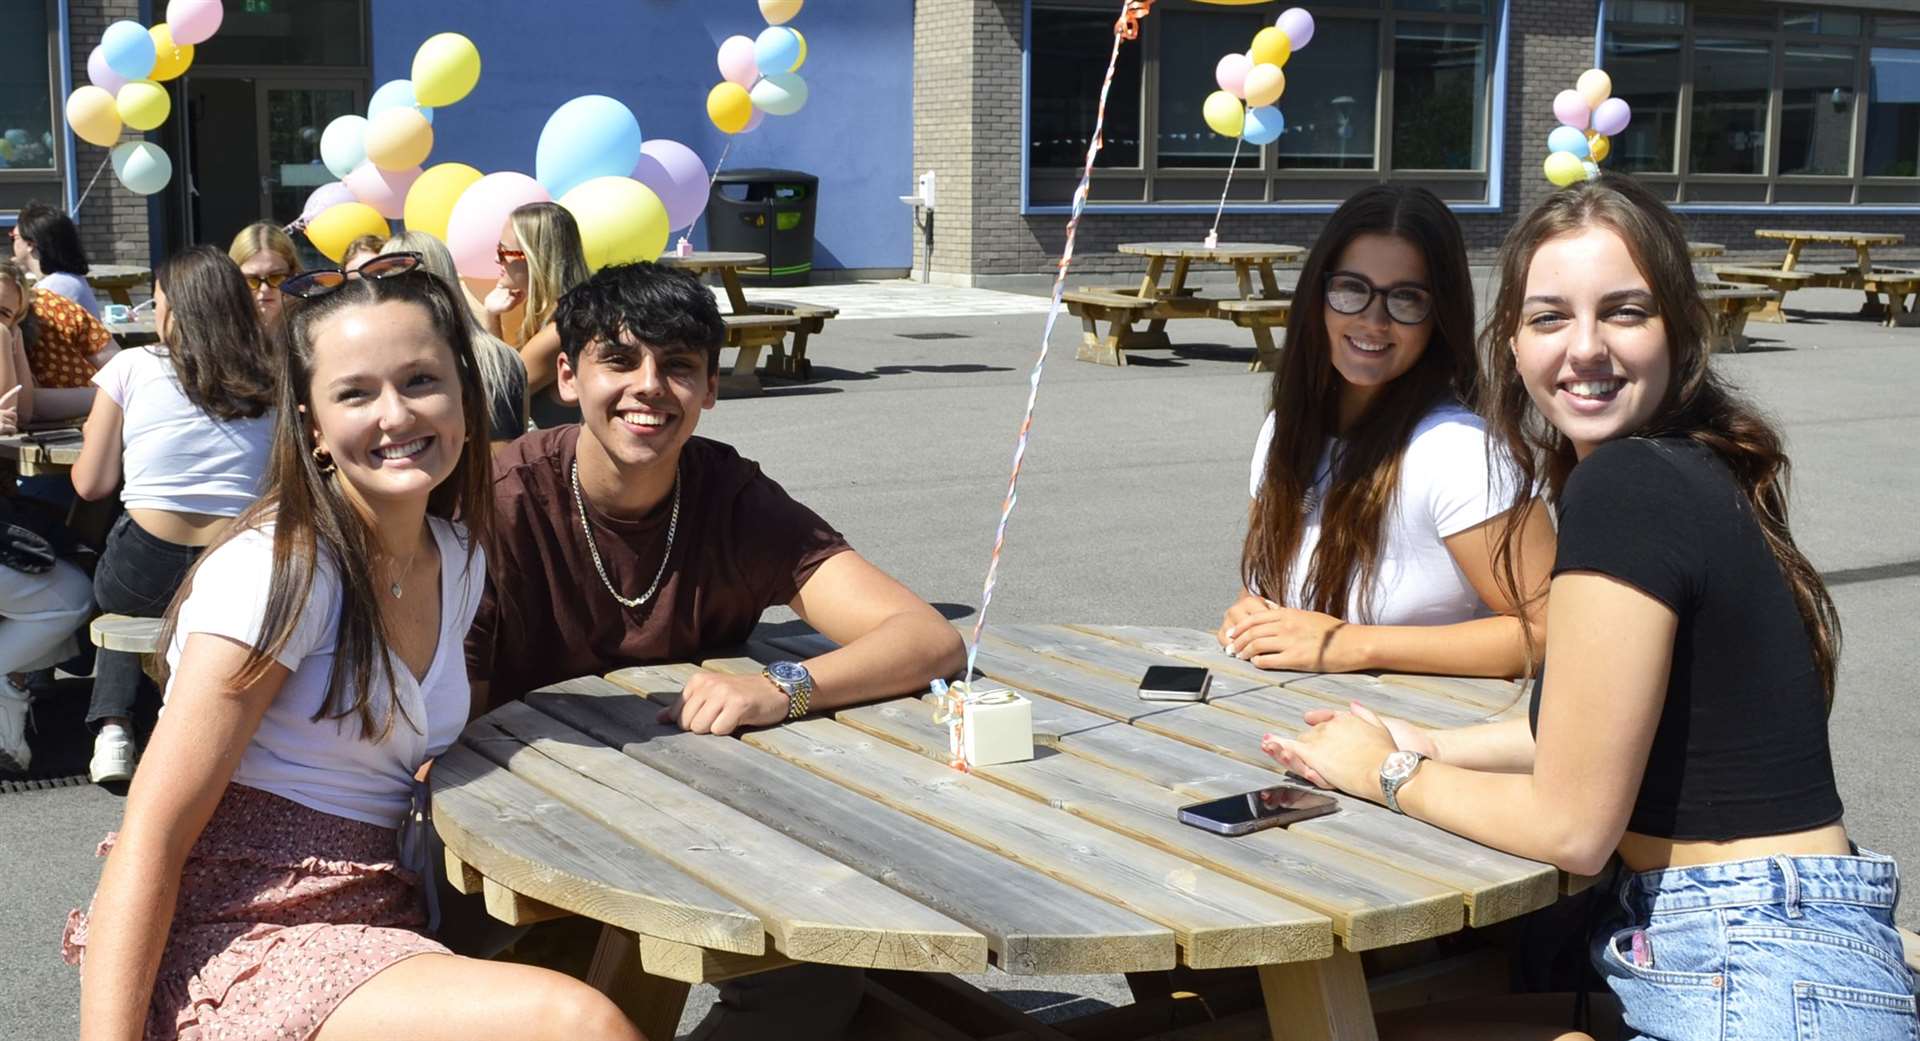 Pupils from Invicta Grammar School in Maidstone have been celebrating their A-level grades with a farewell party at the new School of Science and Technology in Maidstone